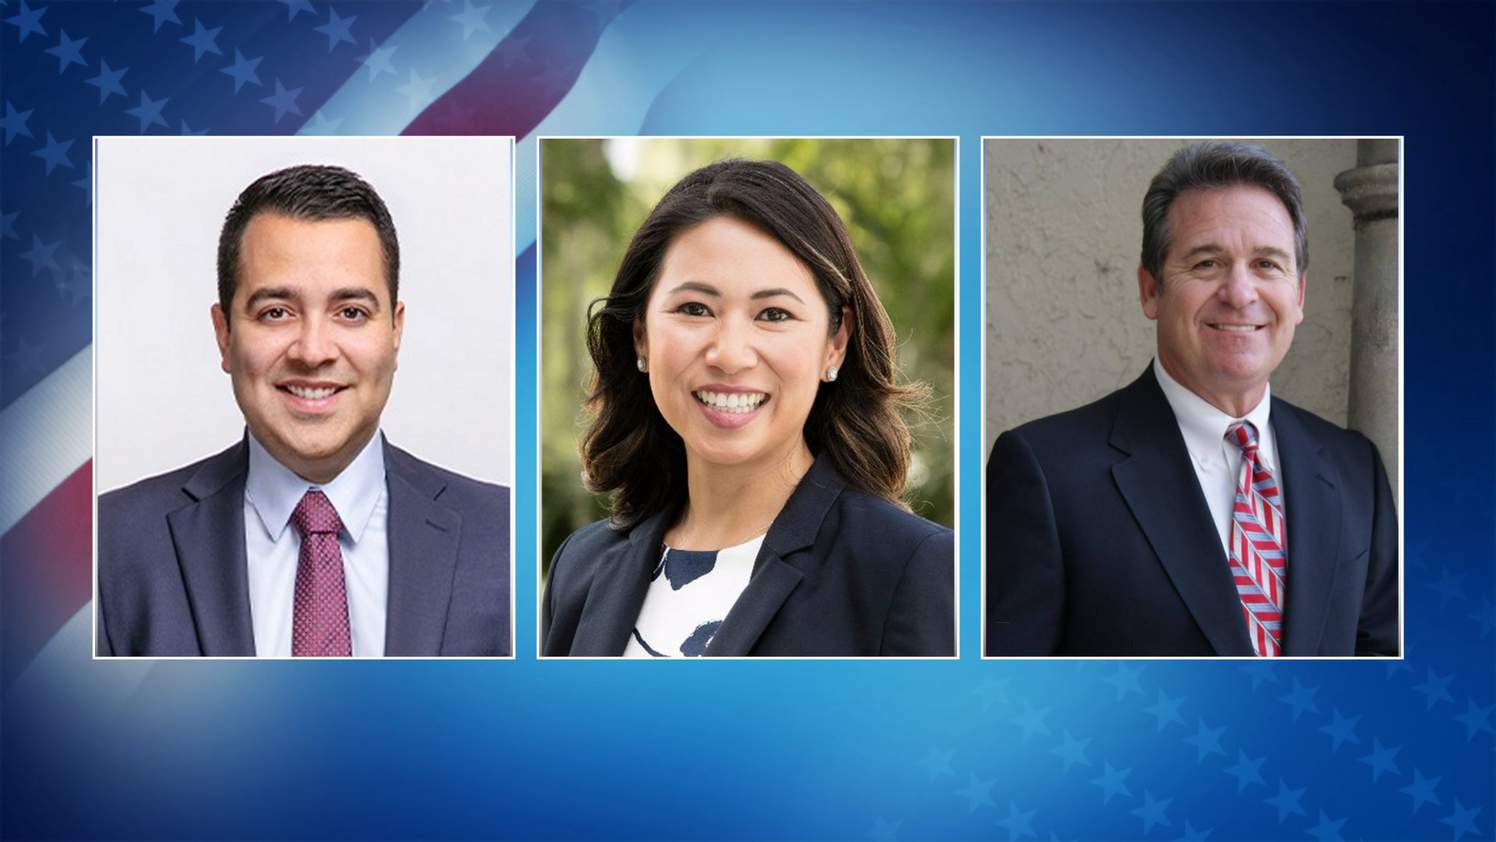 Meet the candidates: Here’s who’s running for US House District 7